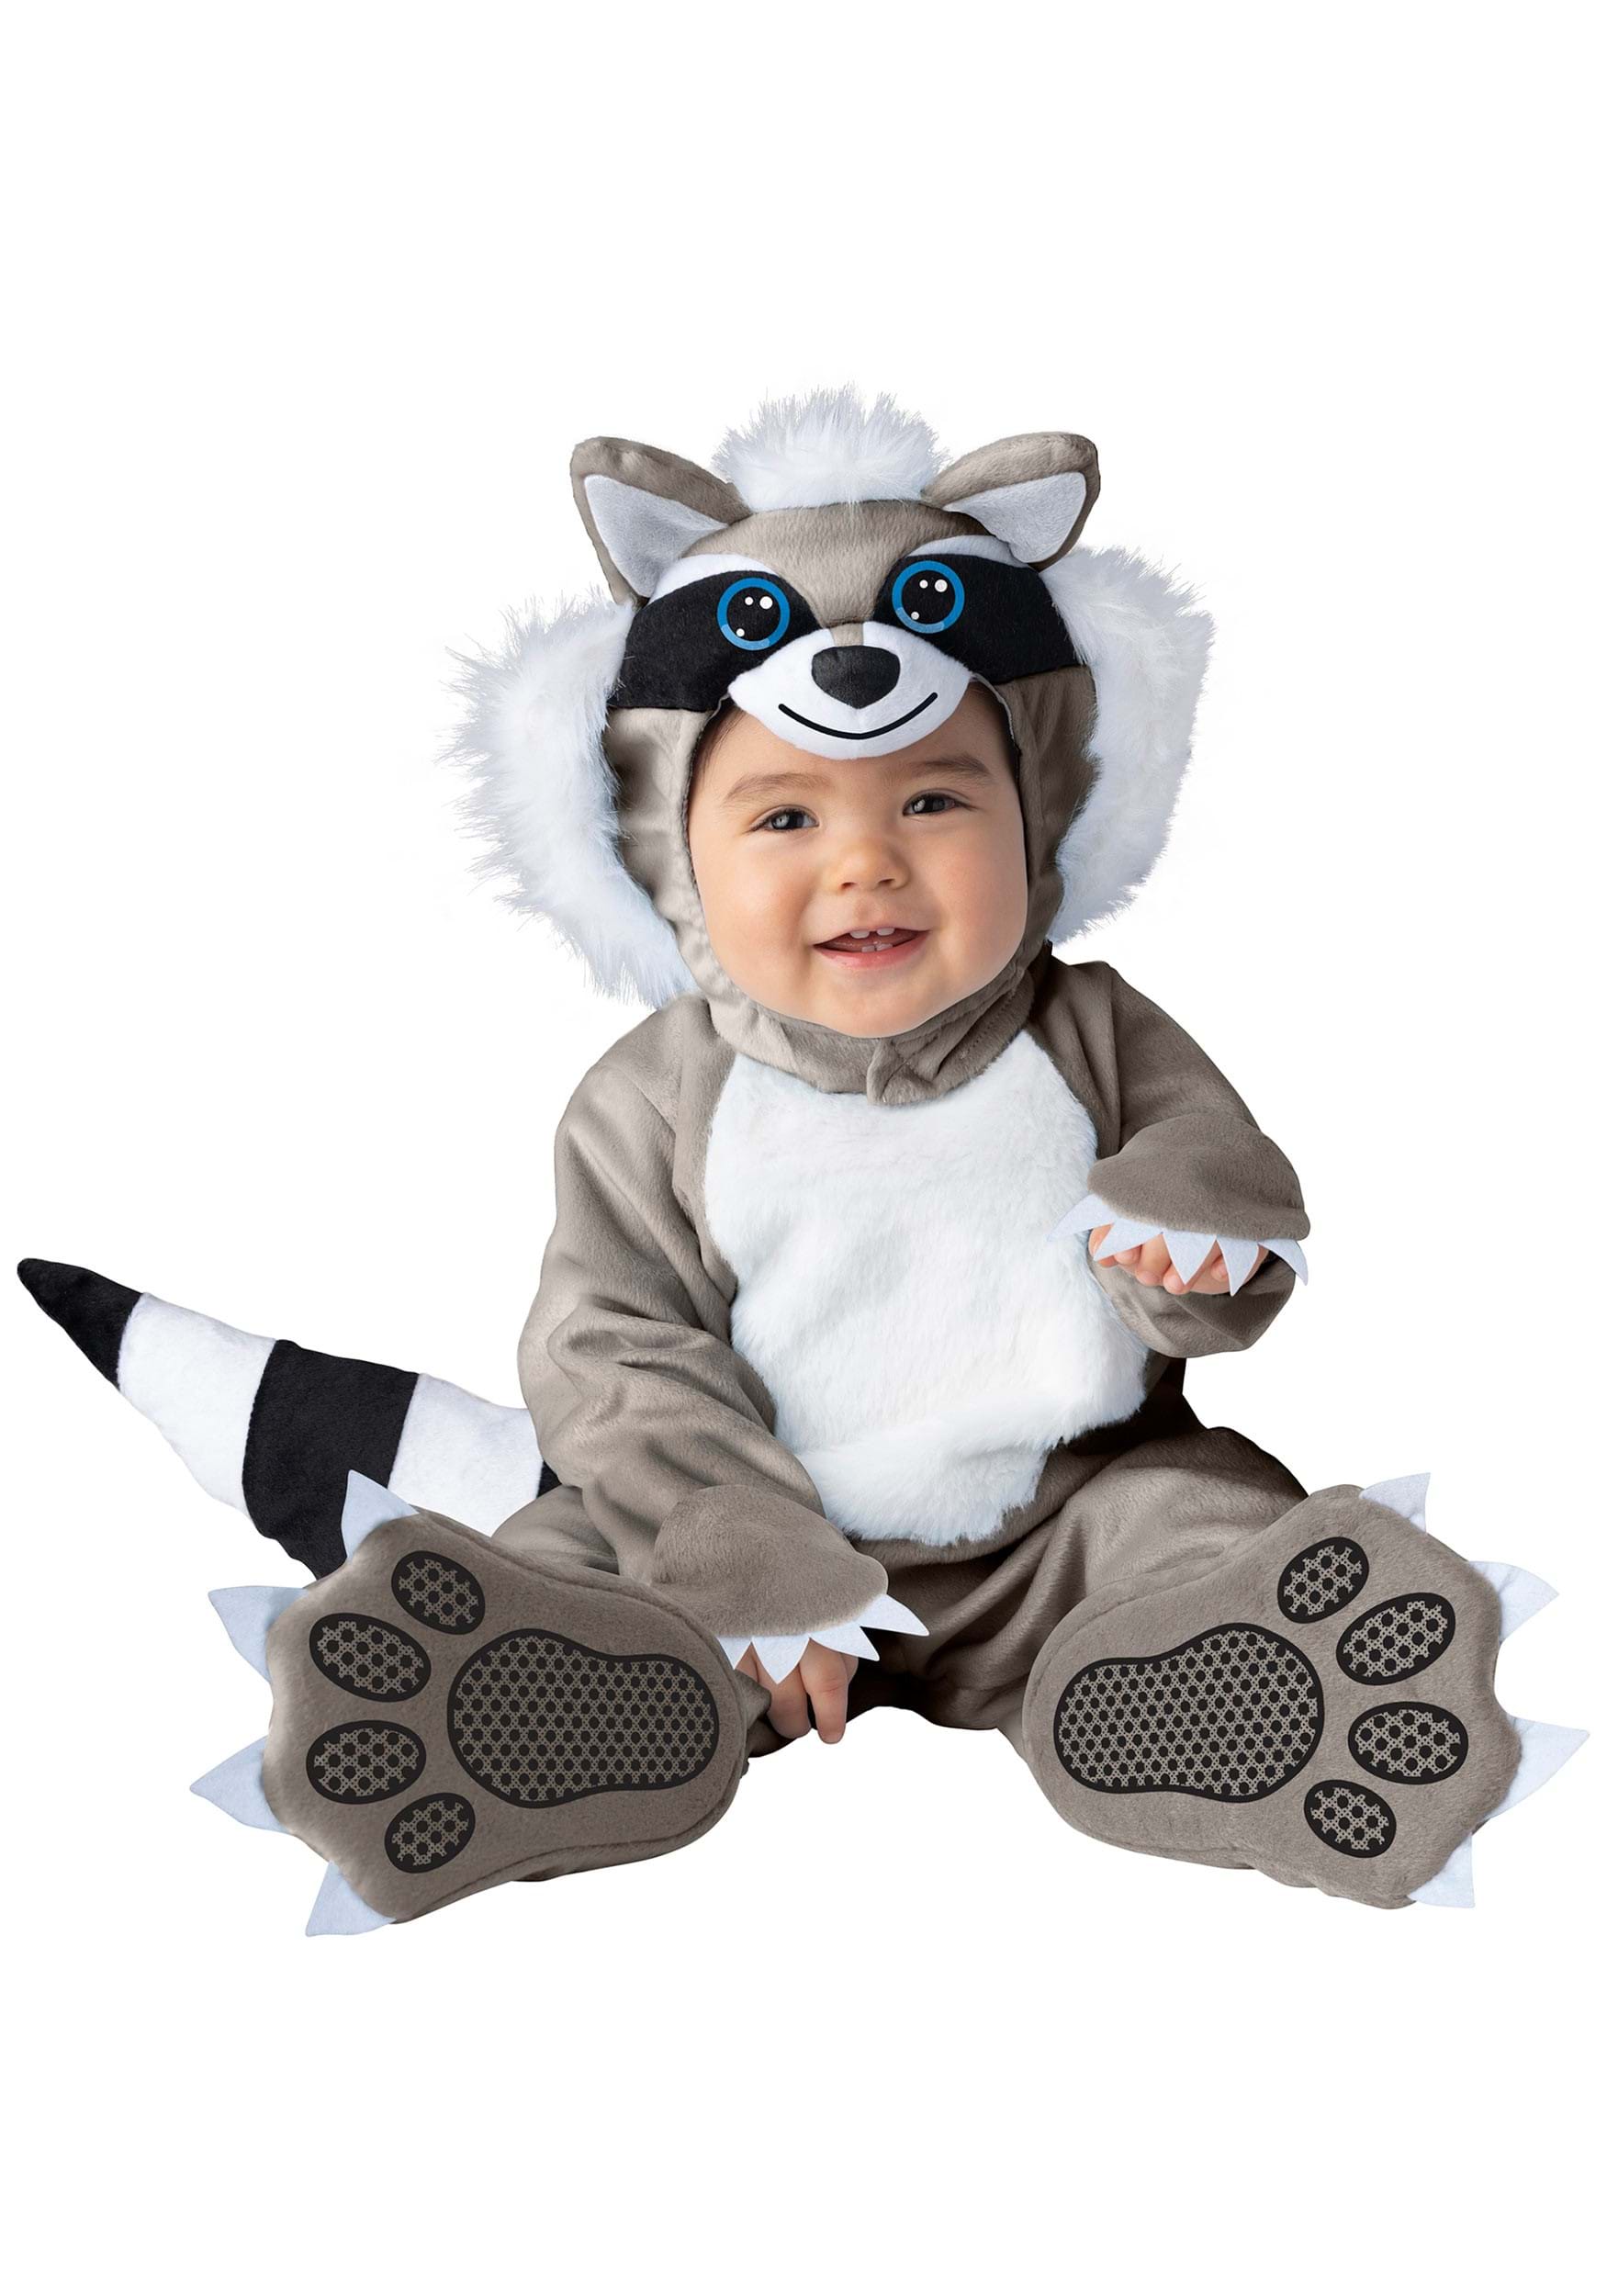 Lil Raccoon Costume for Infants